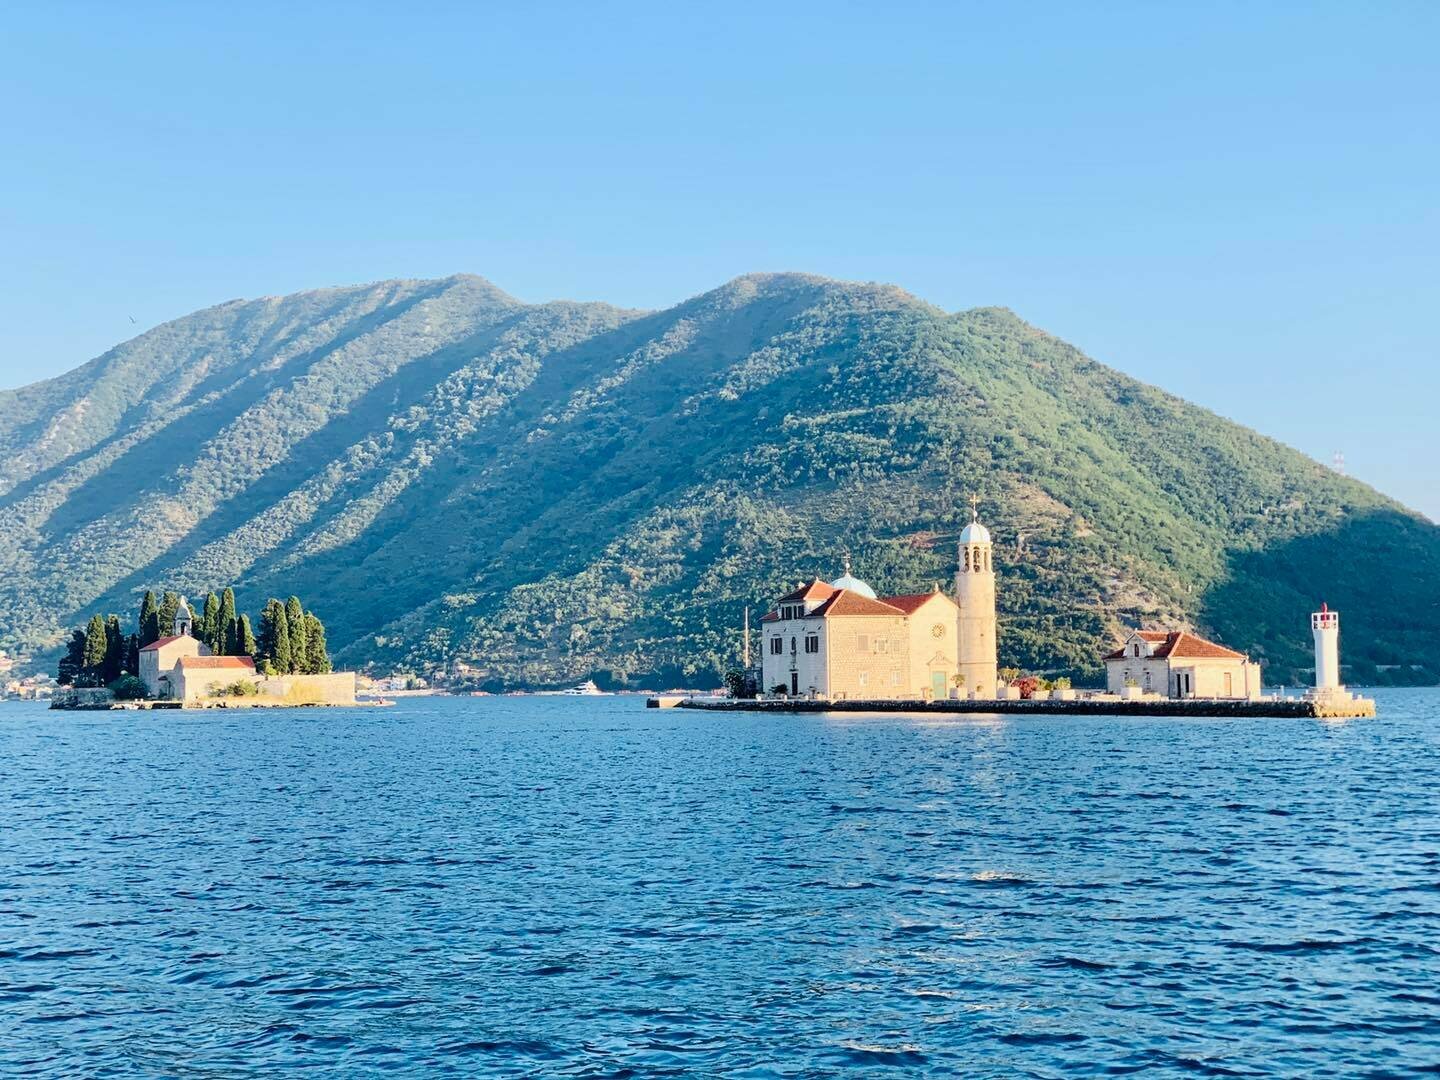  5-Best-things-to-do-in-kotor-from-a-cruise-ship-kotor-excursions